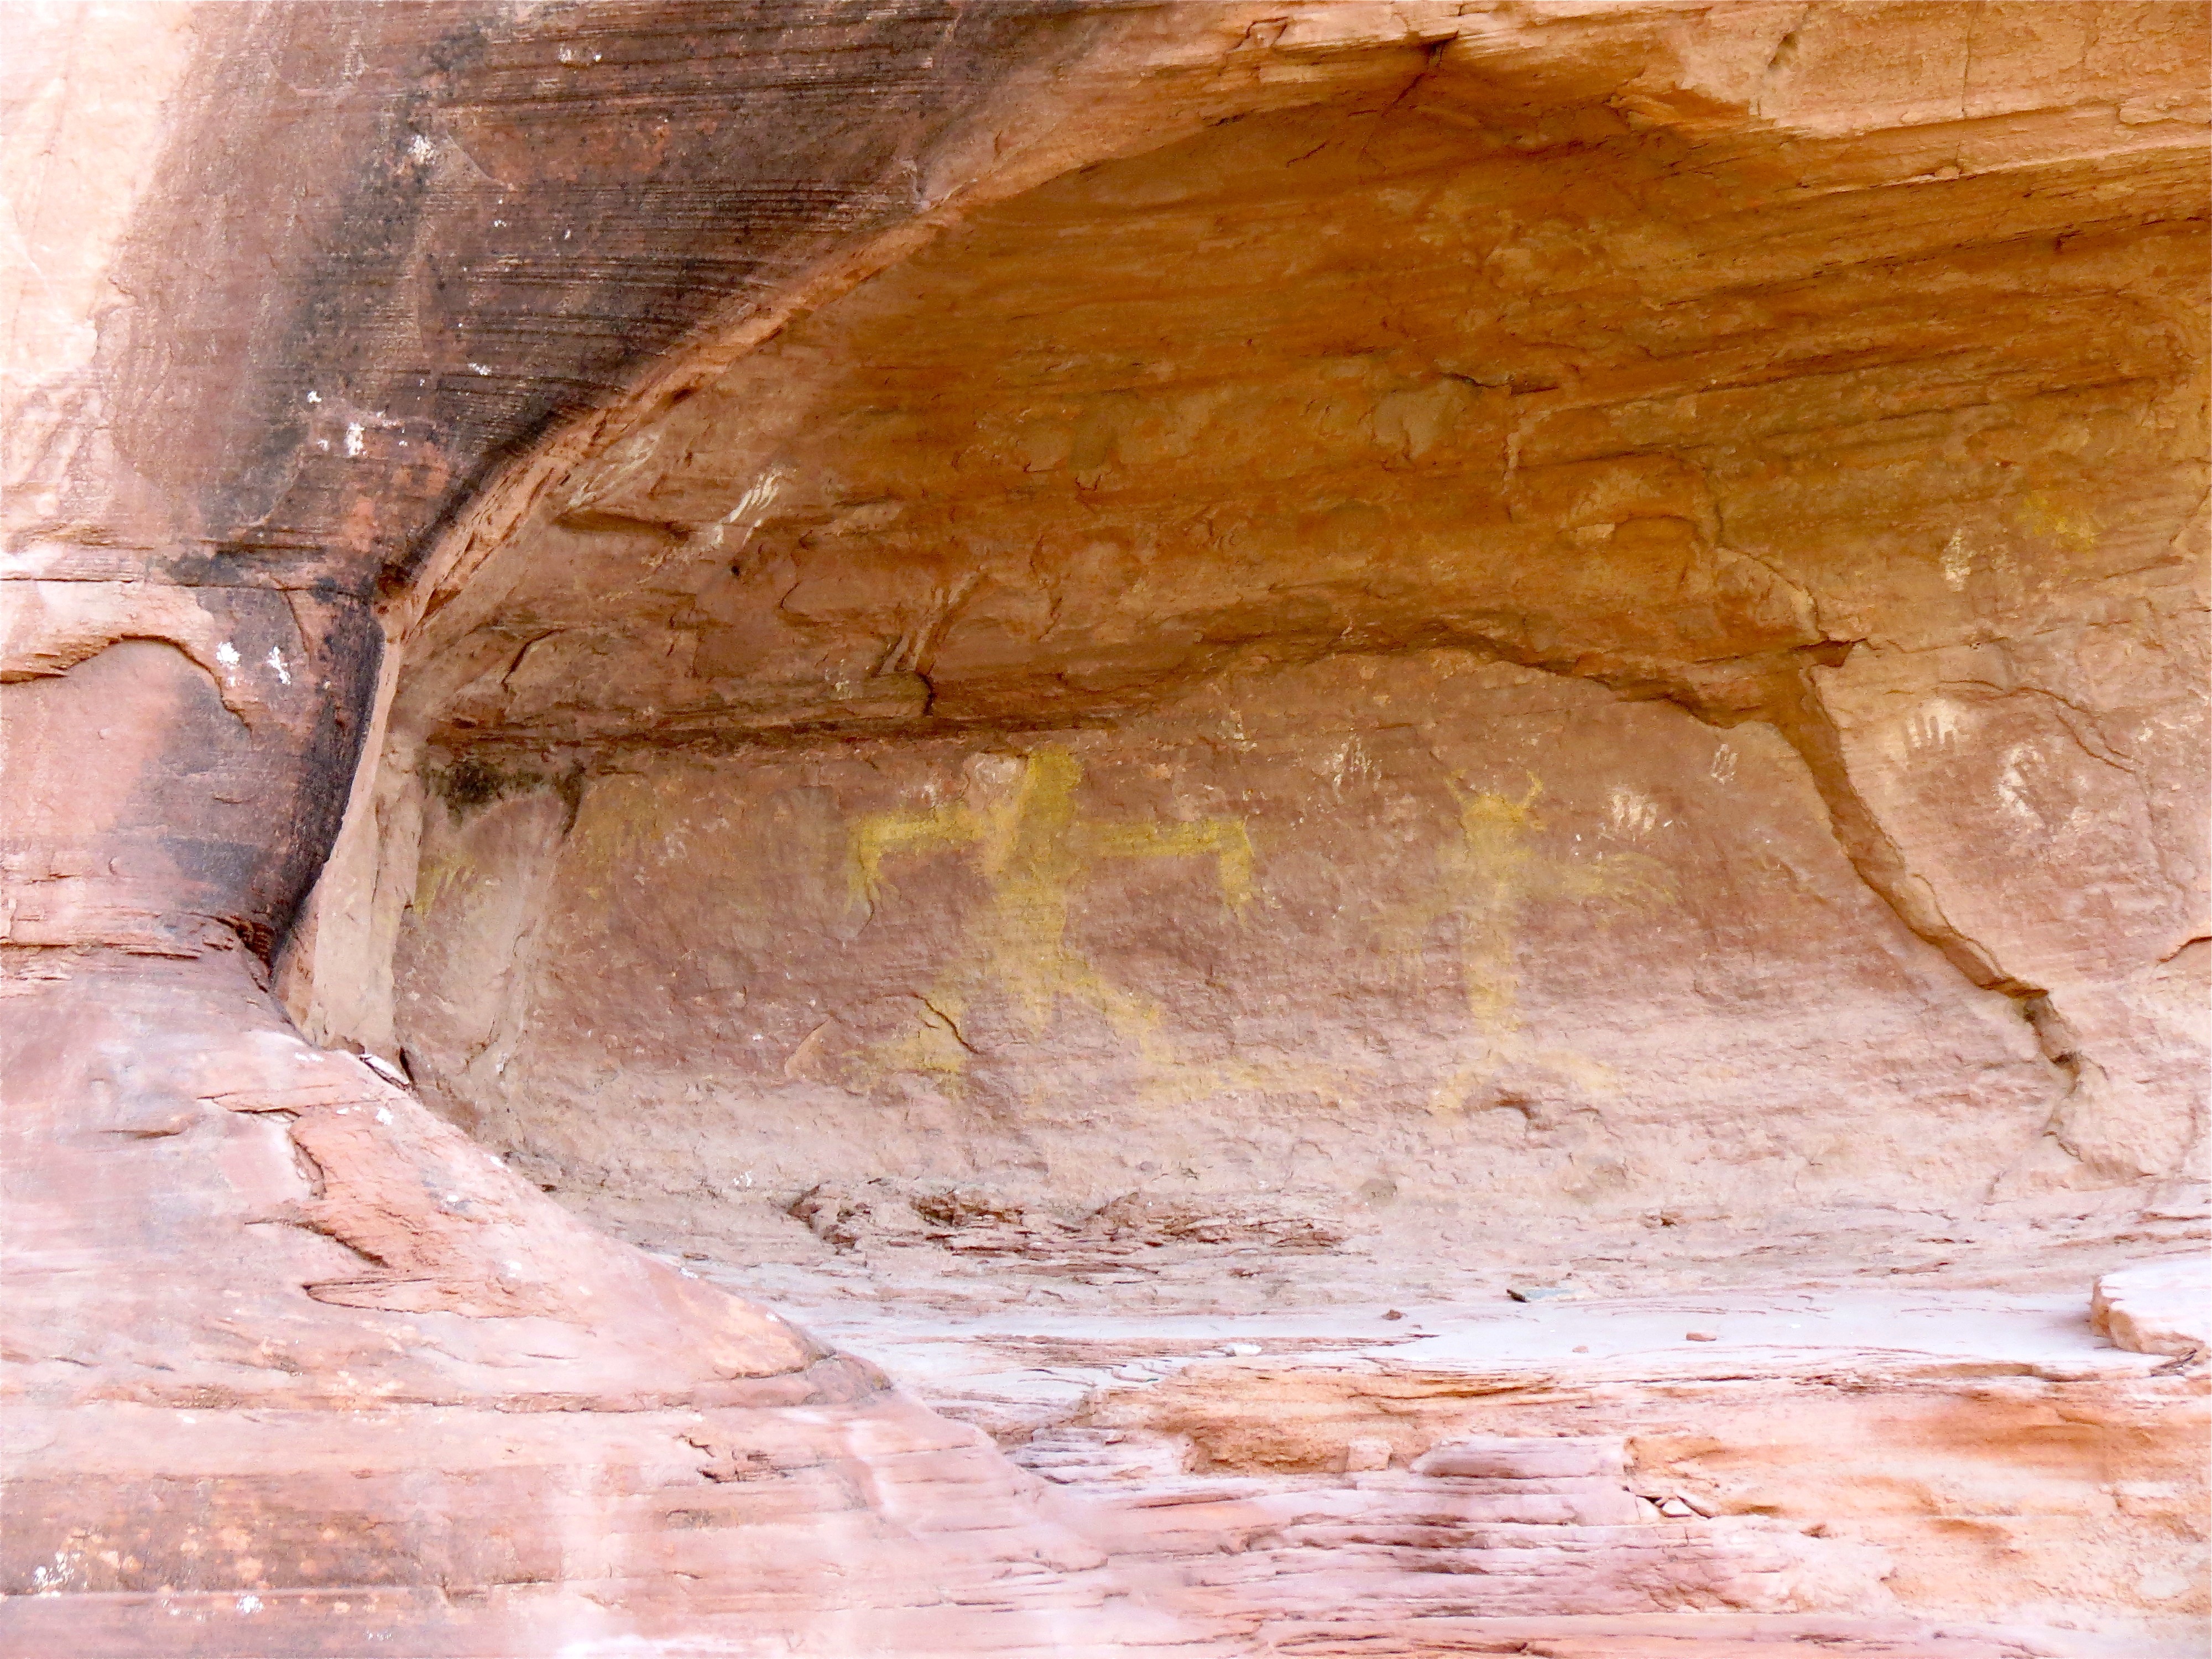 Must-visit with kids: Canyon de Chelly in Arizona